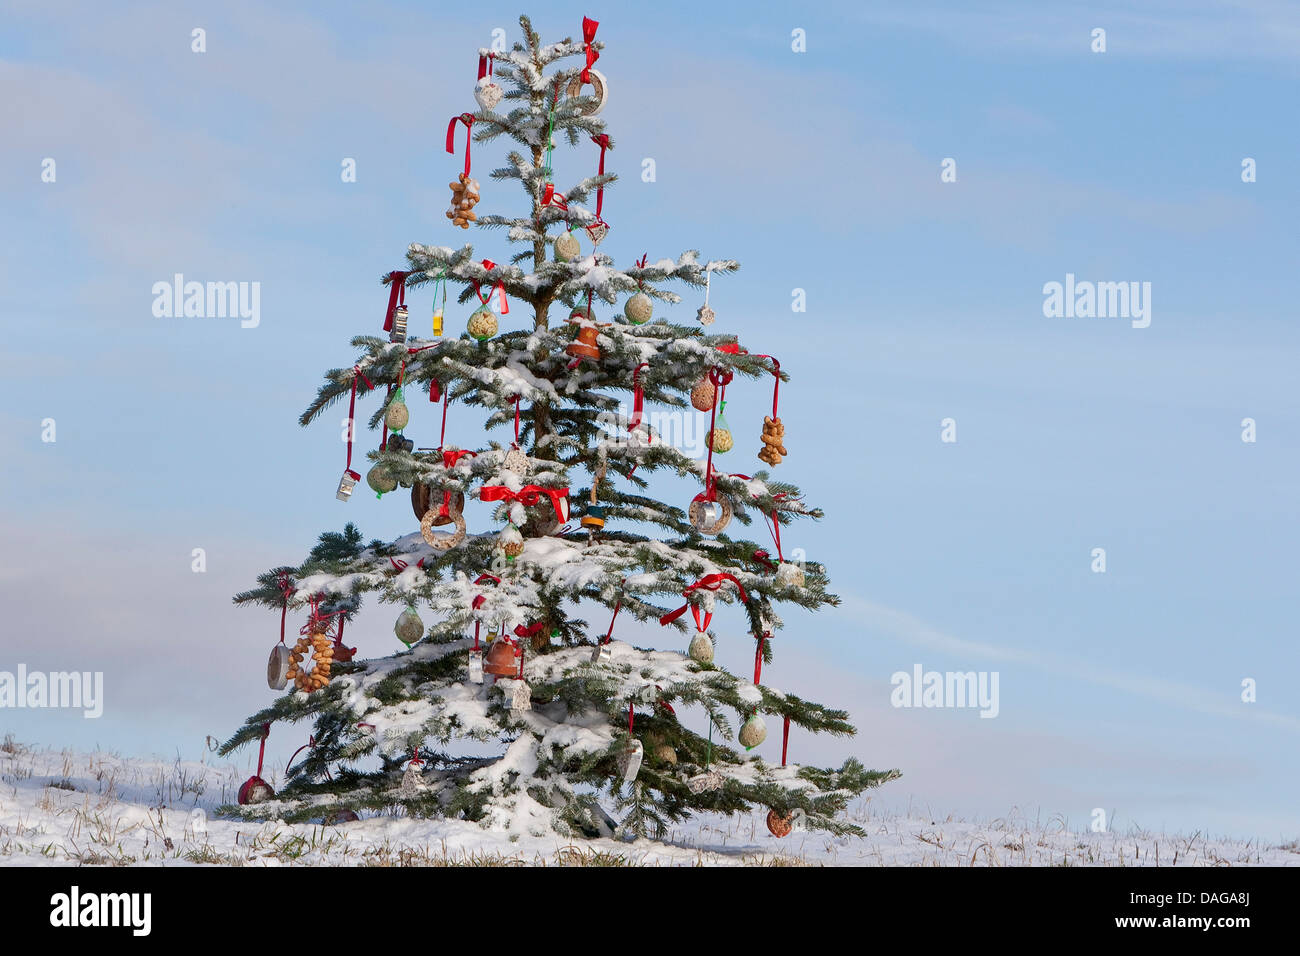 Christmas tree in a snow-covered garden adorned with fat balls for the birds, Germany Stock Photo